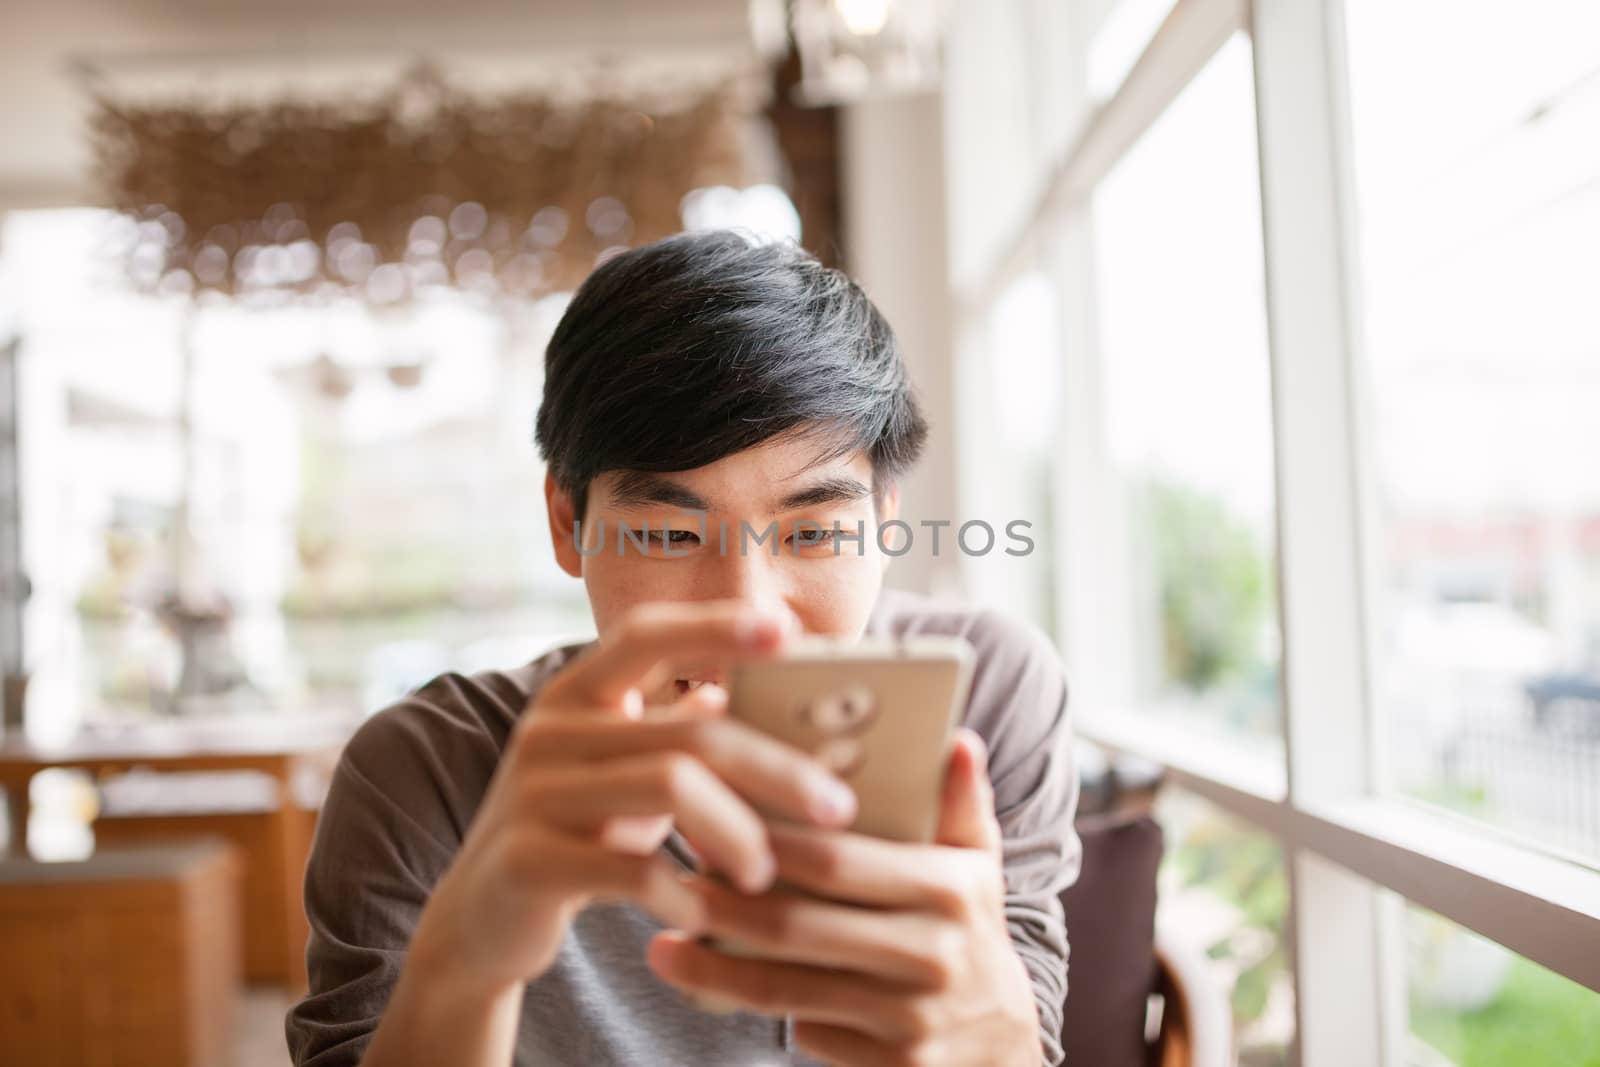 Smiling man using smartphone for online chat or shopping by nopparats